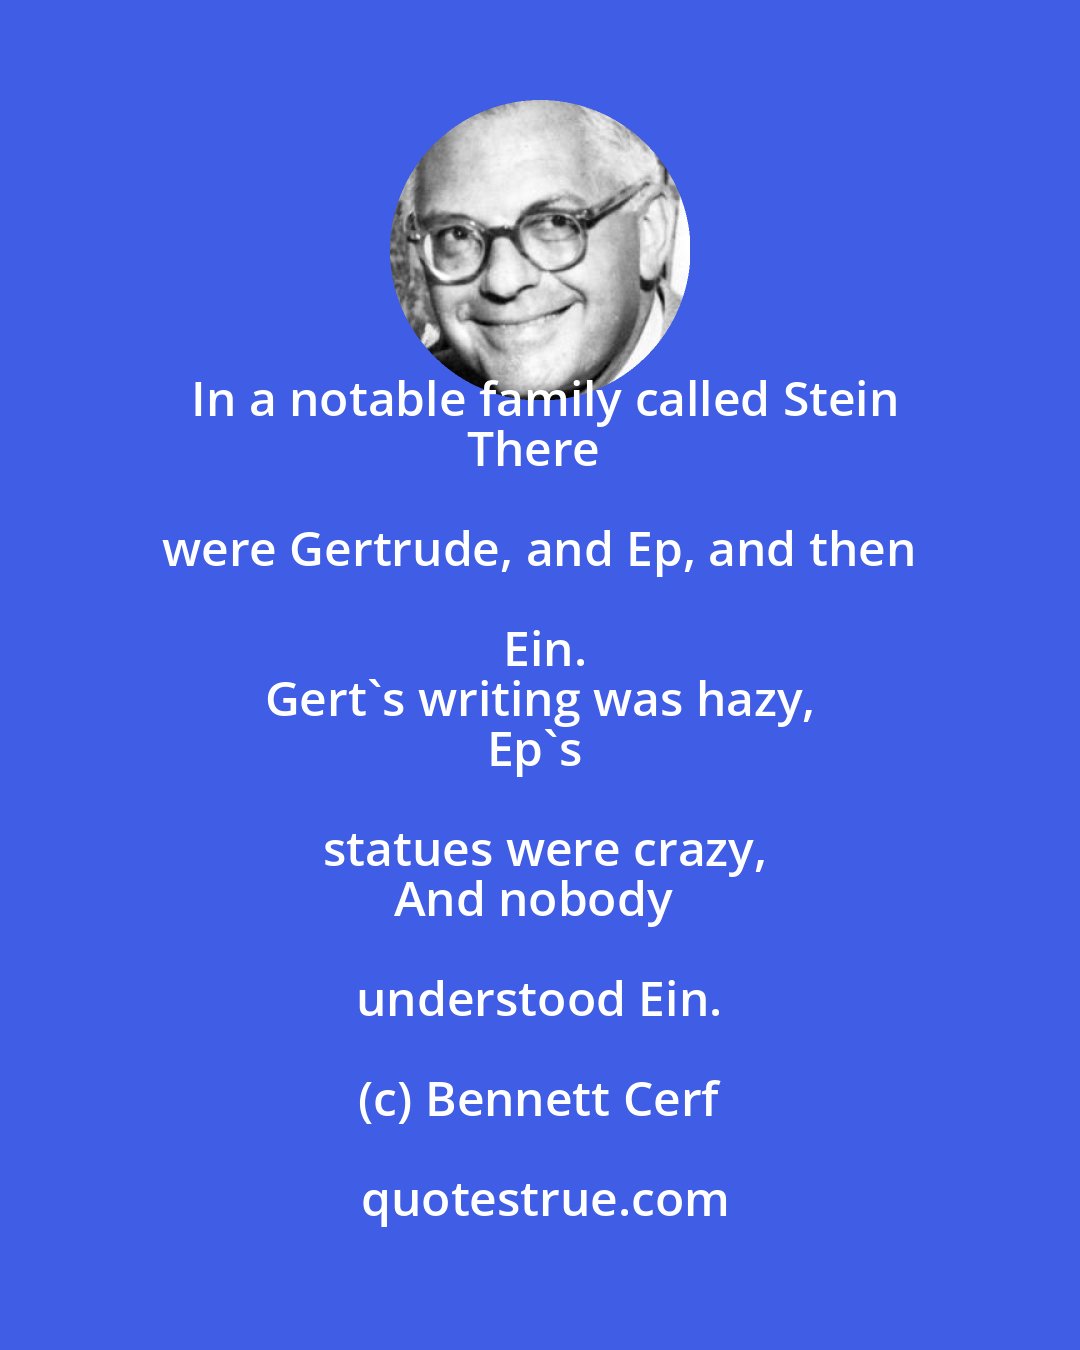 Bennett Cerf: In a notable family called Stein
There were Gertrude, and Ep, and then Ein.
Gert's writing was hazy,
Ep's statues were crazy,
And nobody understood Ein.